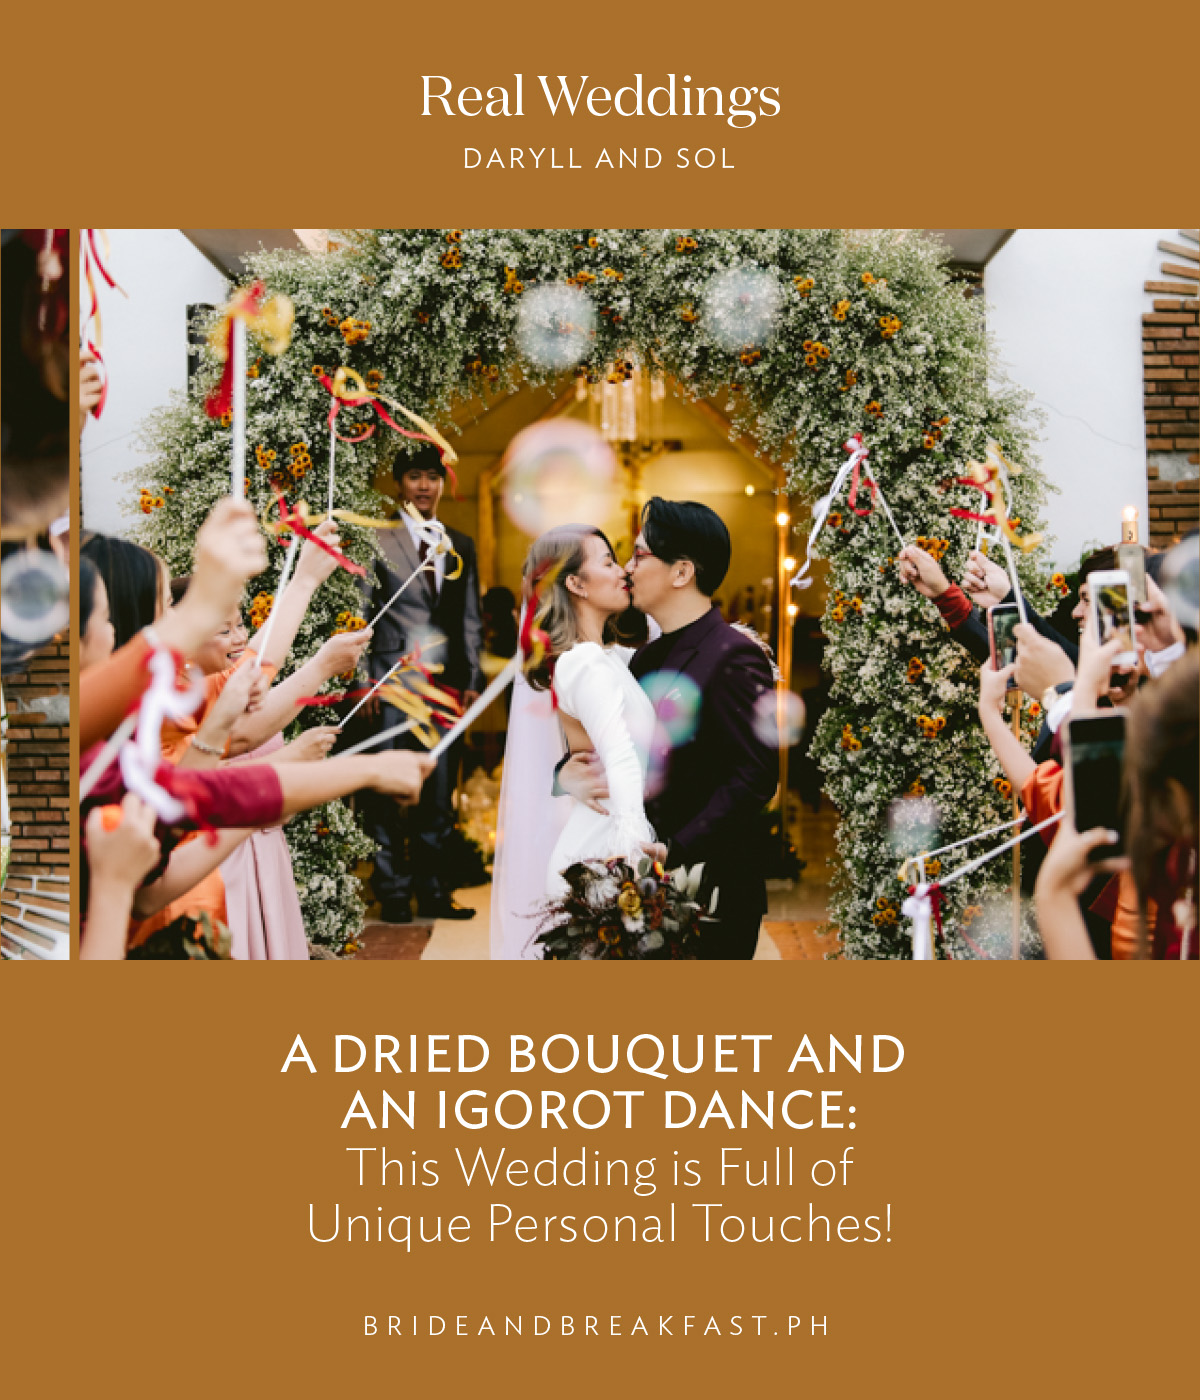 A Dried Bouquet and an Igorot Dance: This Wedding is Full of Unique Personal Touches!